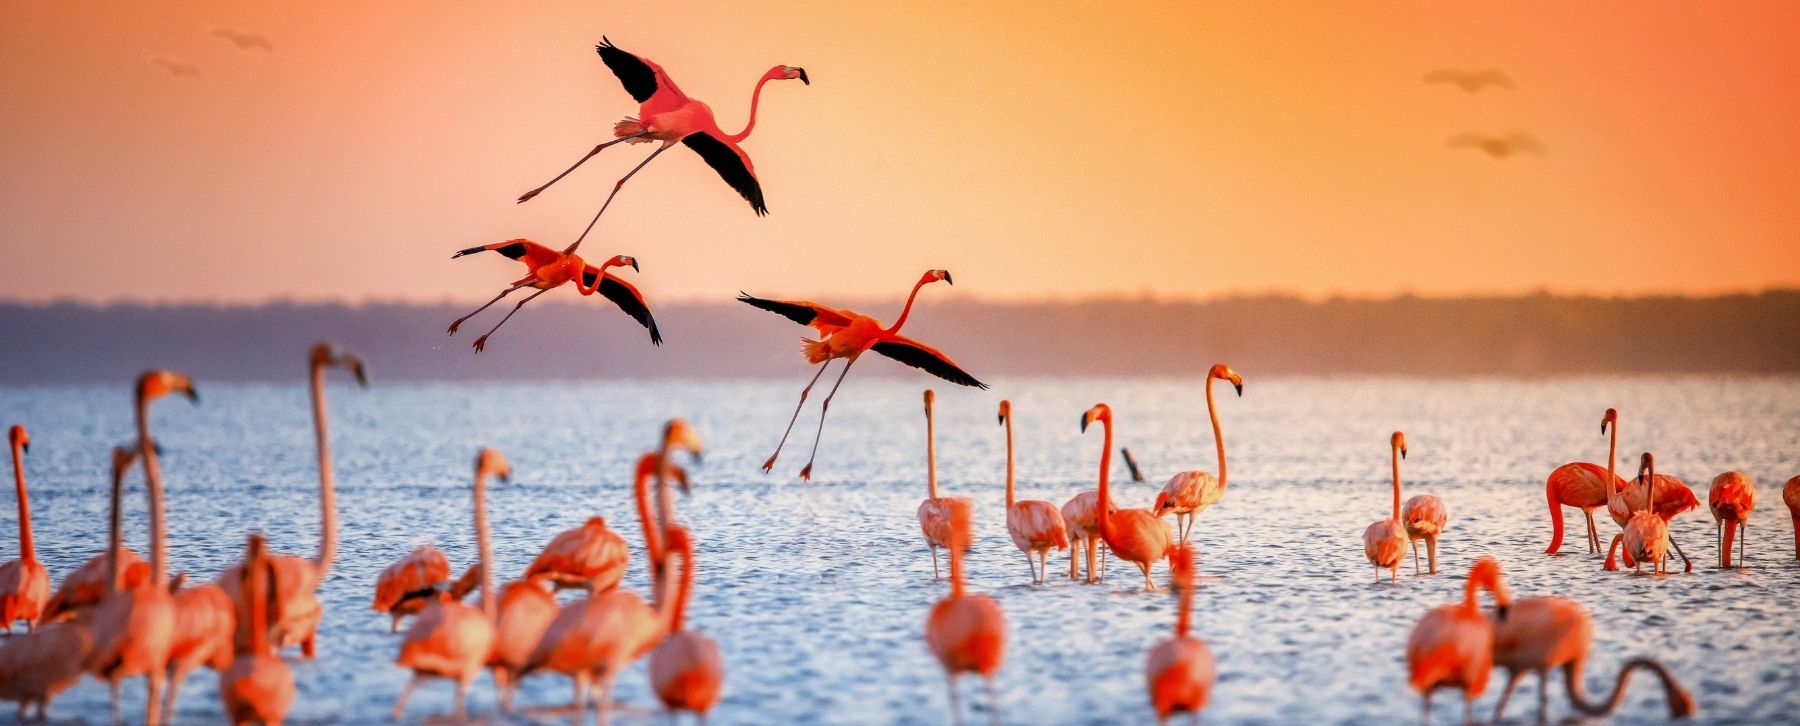 Follow Your Inner Florida-Man with Our Hot Pink Flamingos!